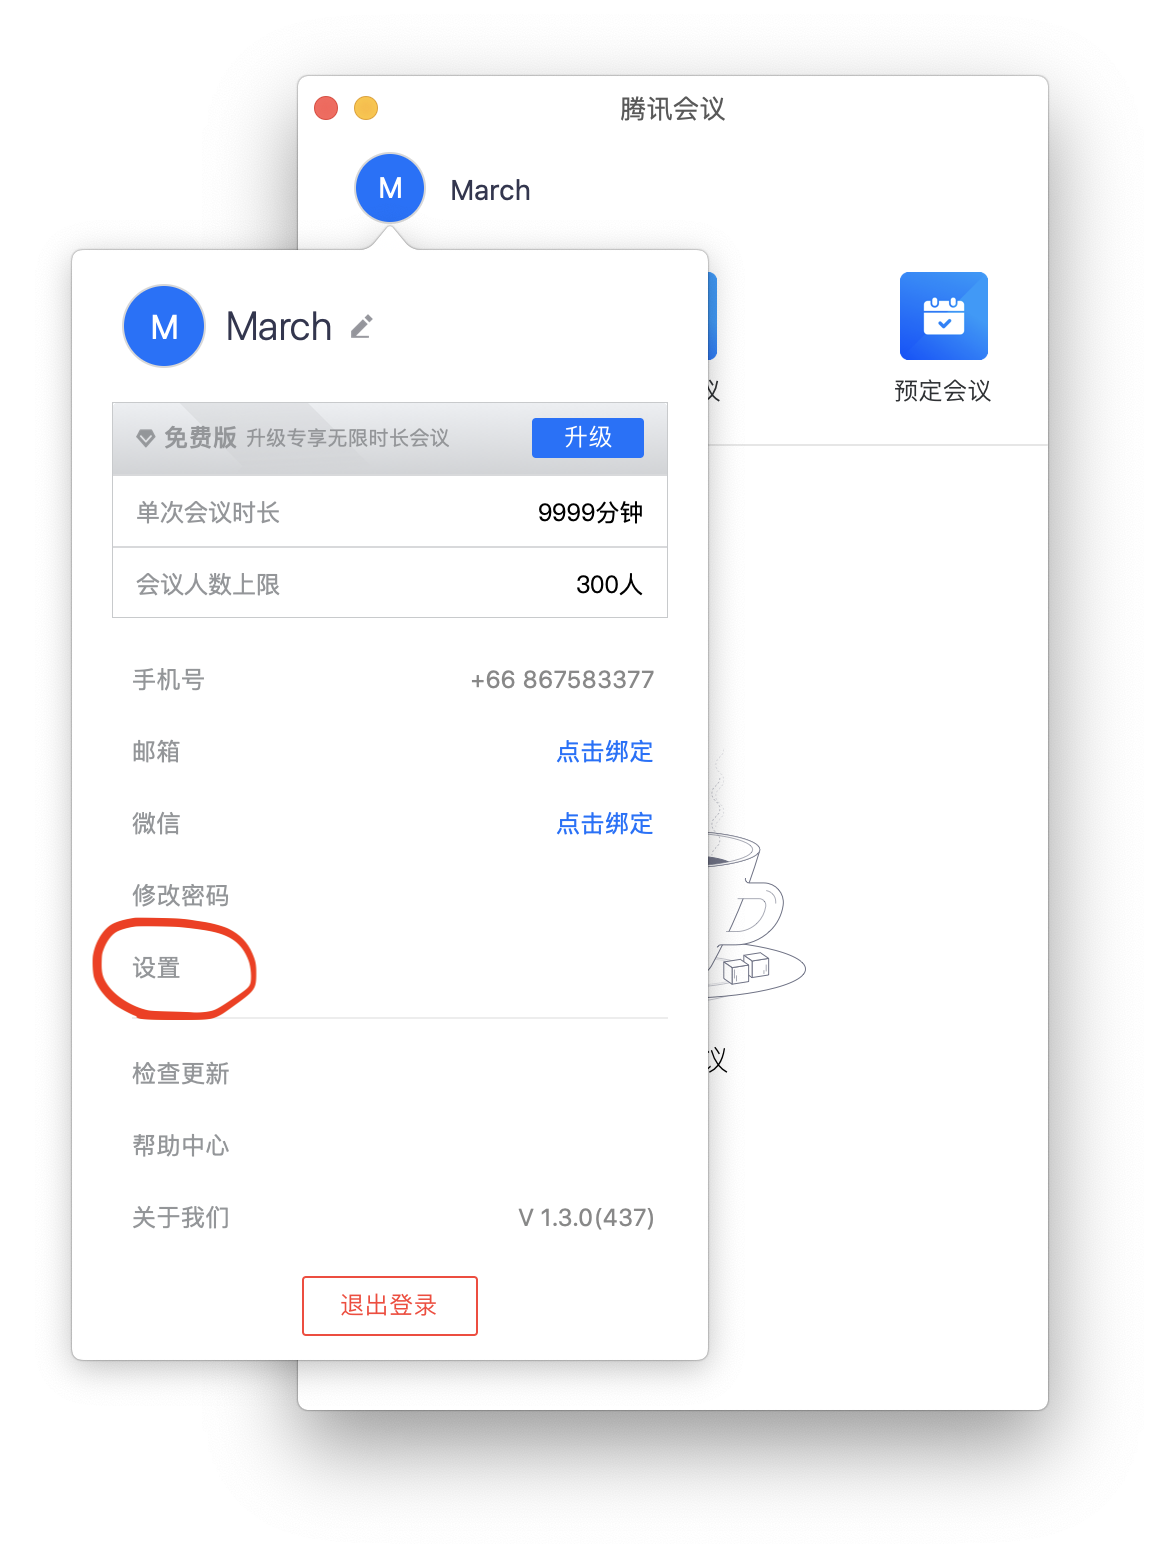 Tencent Meeting Home Interface